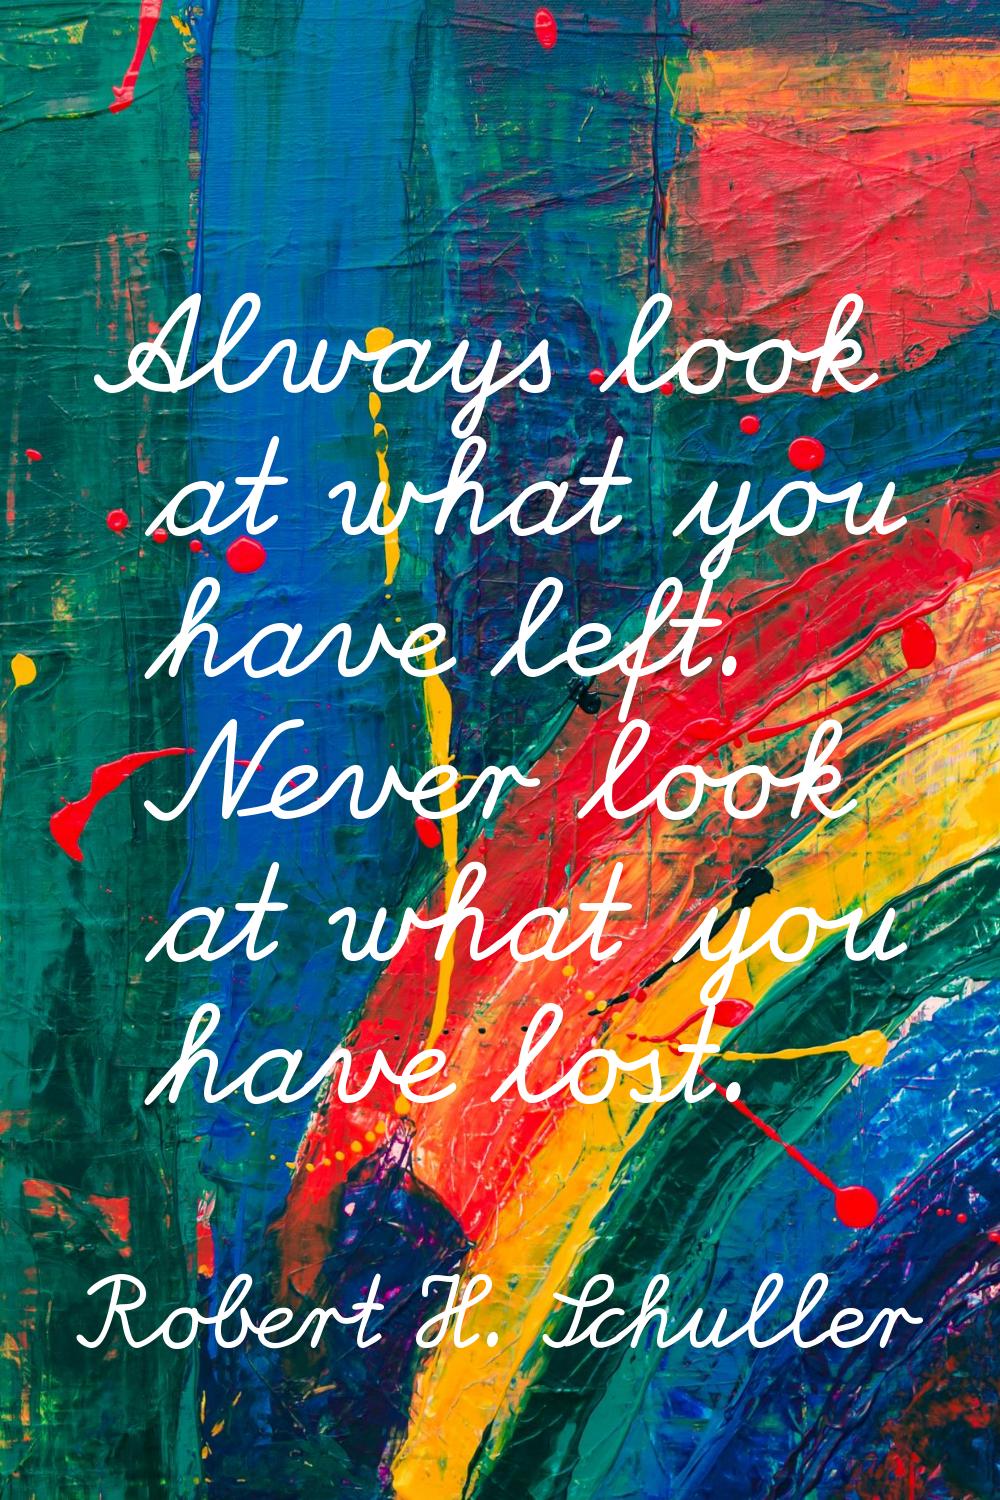 Always look at what you have left. Never look at what you have lost.